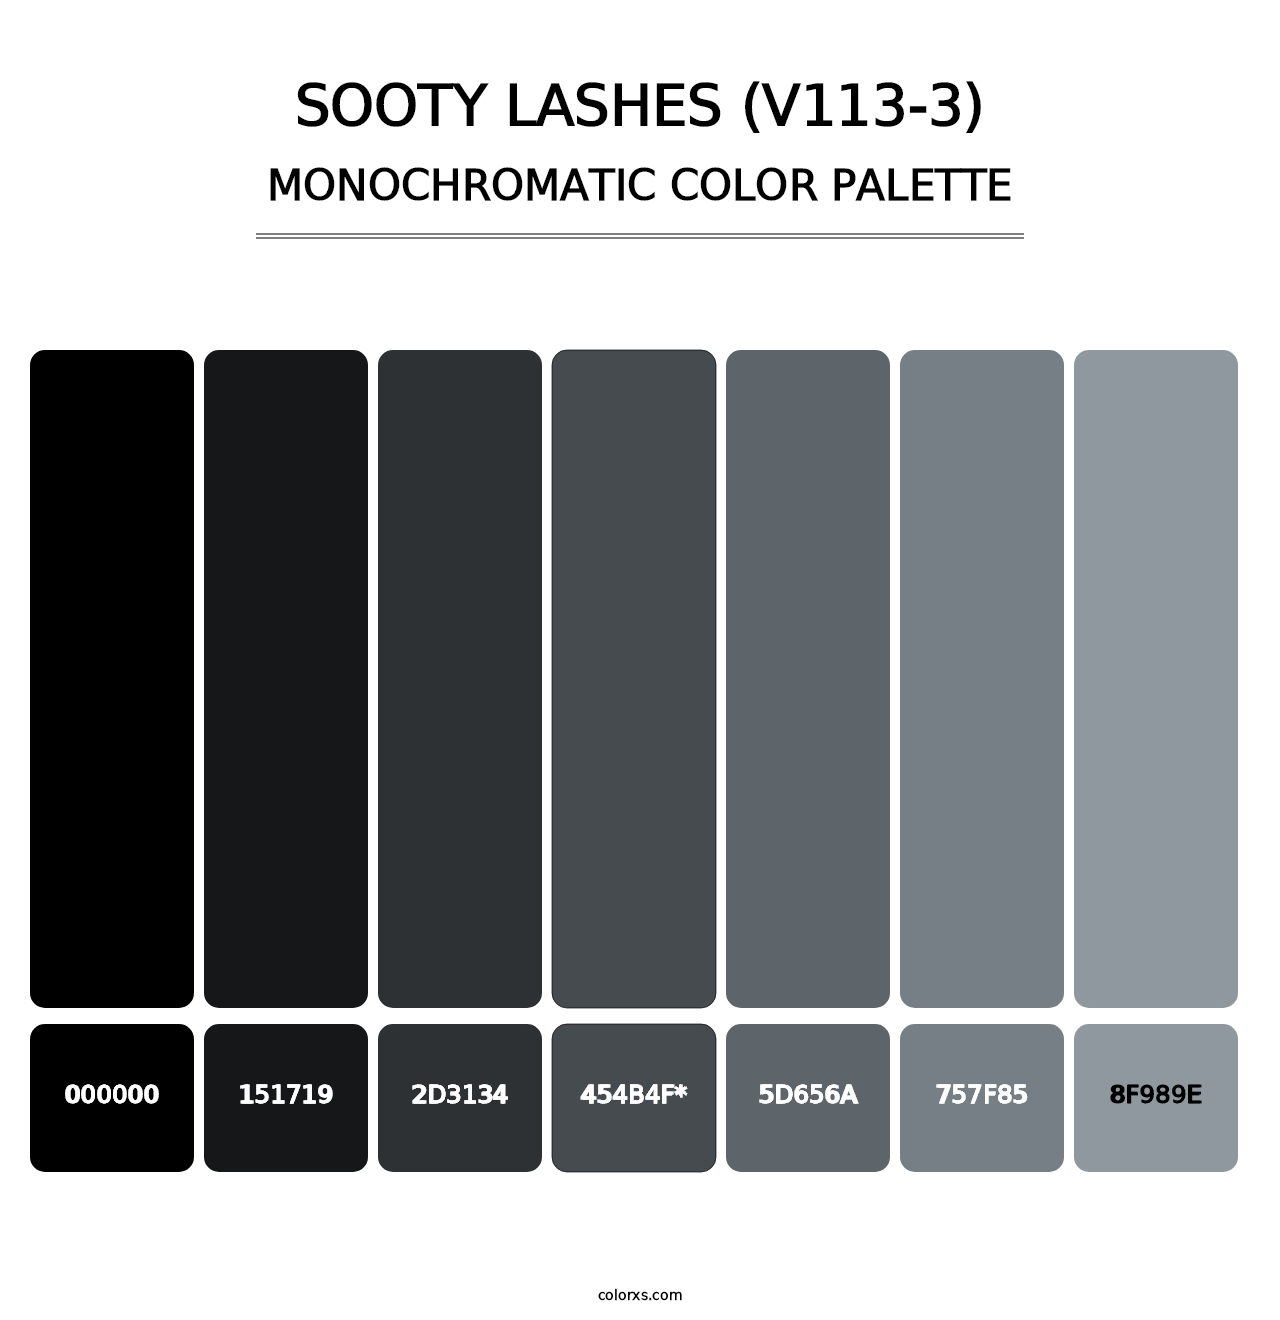 Sooty Lashes (V113-3) - Monochromatic Color Palette